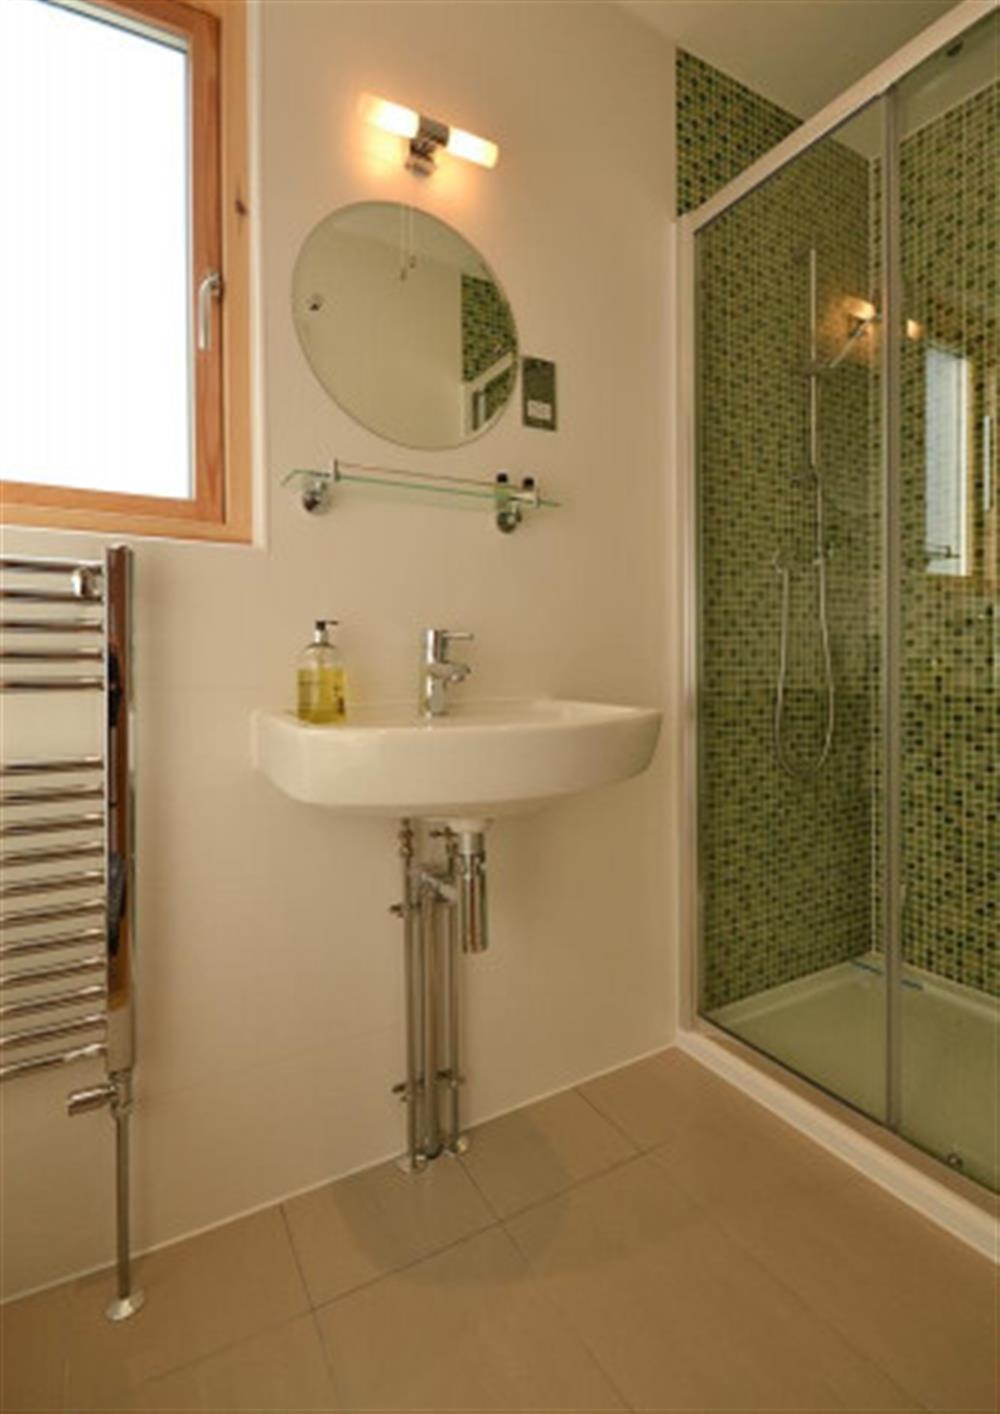 The adjacent shower room at 21 Talland in Talland Bay